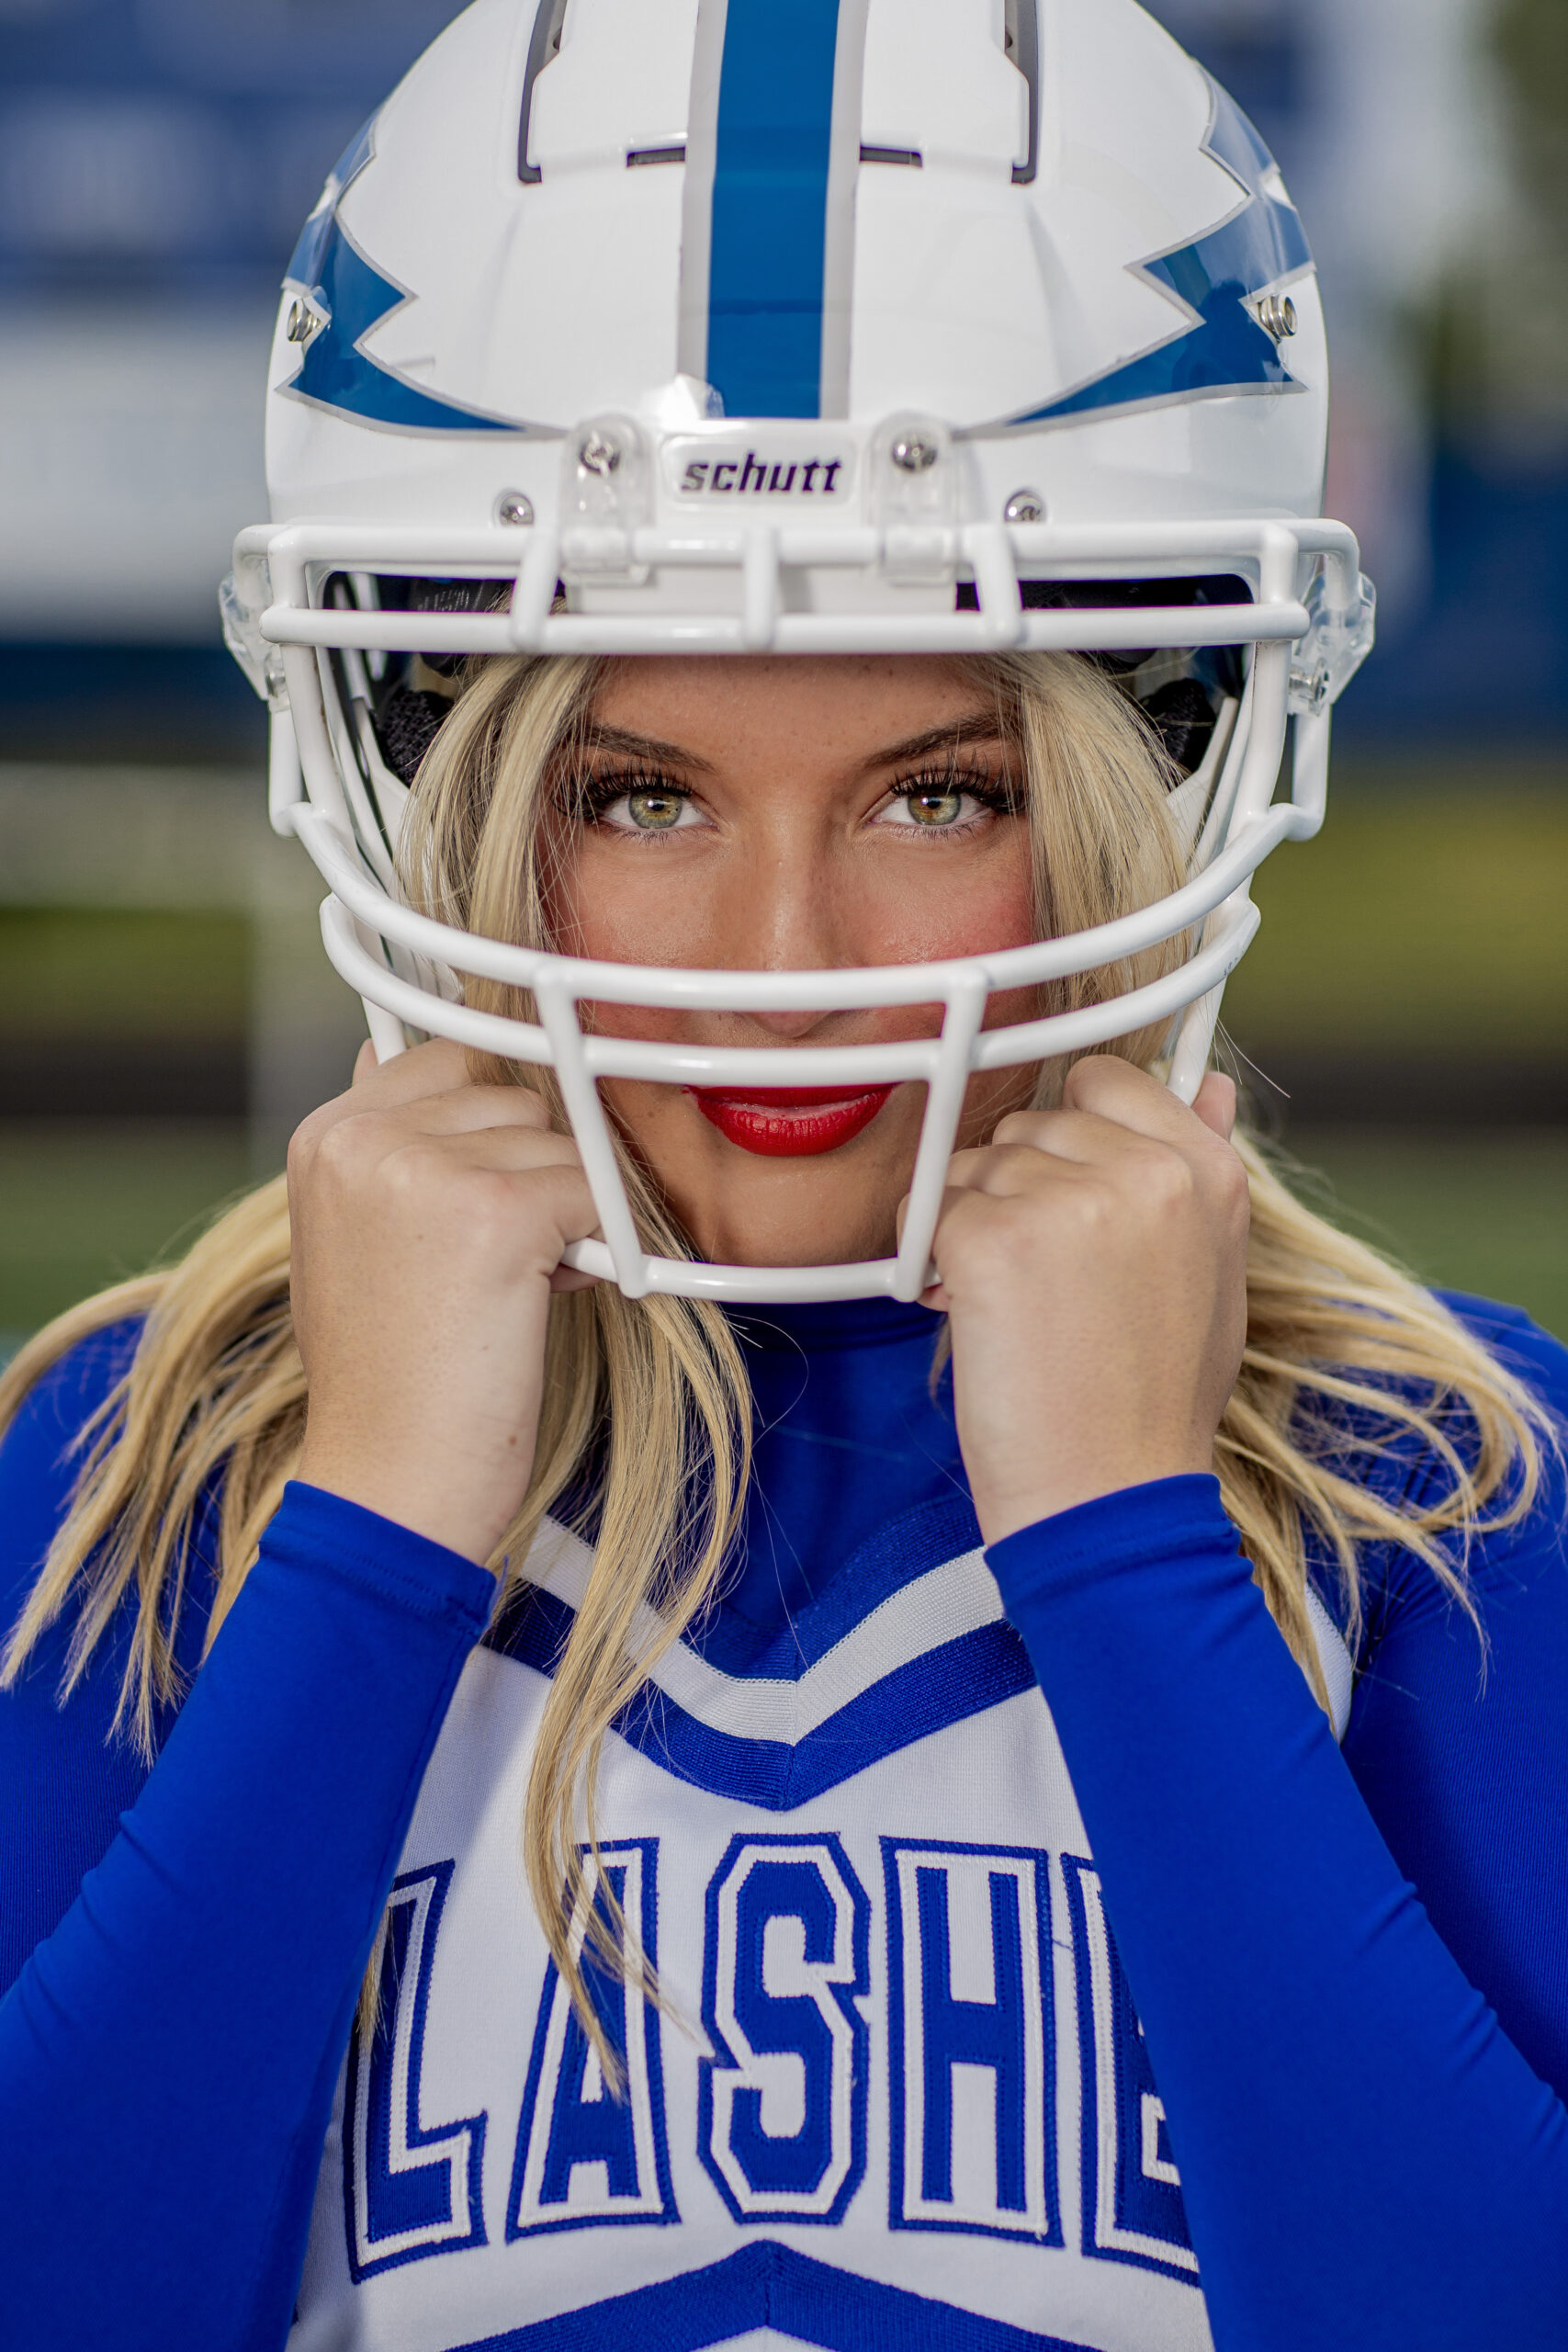 indianapolis senior pictures Indiana photographer photography cheer